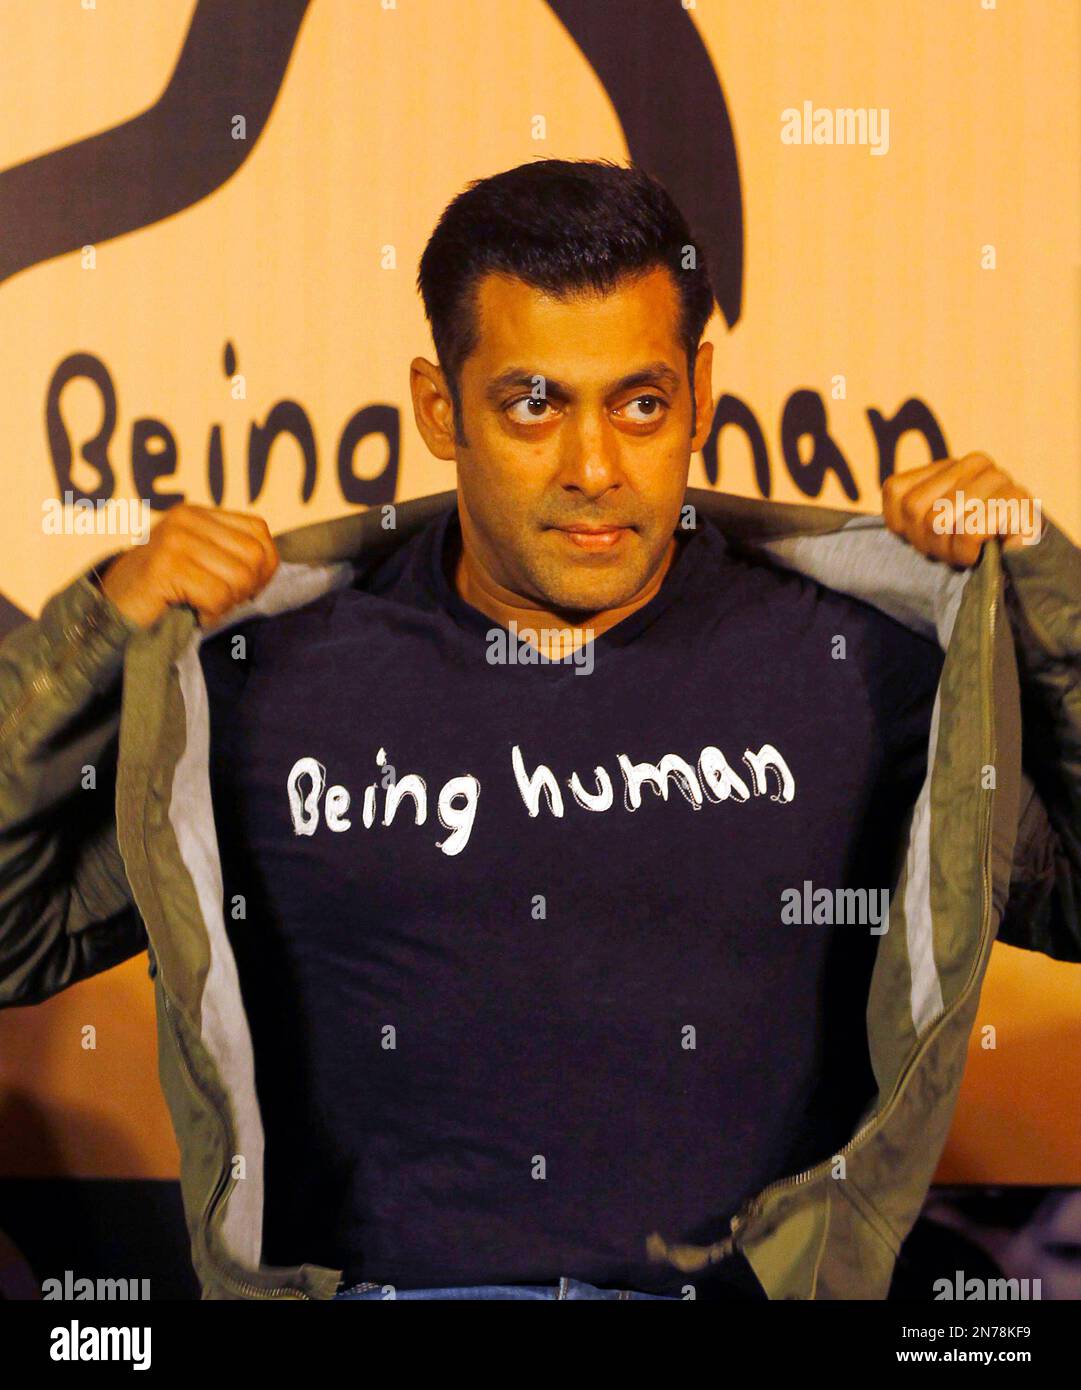 FILE – In this Thursday, 17, 2013 file photo, Bollywood star Salman Khan poses wearing a Being T-shirt during the launch of Being Human's first flagship store in Mumbai, India.